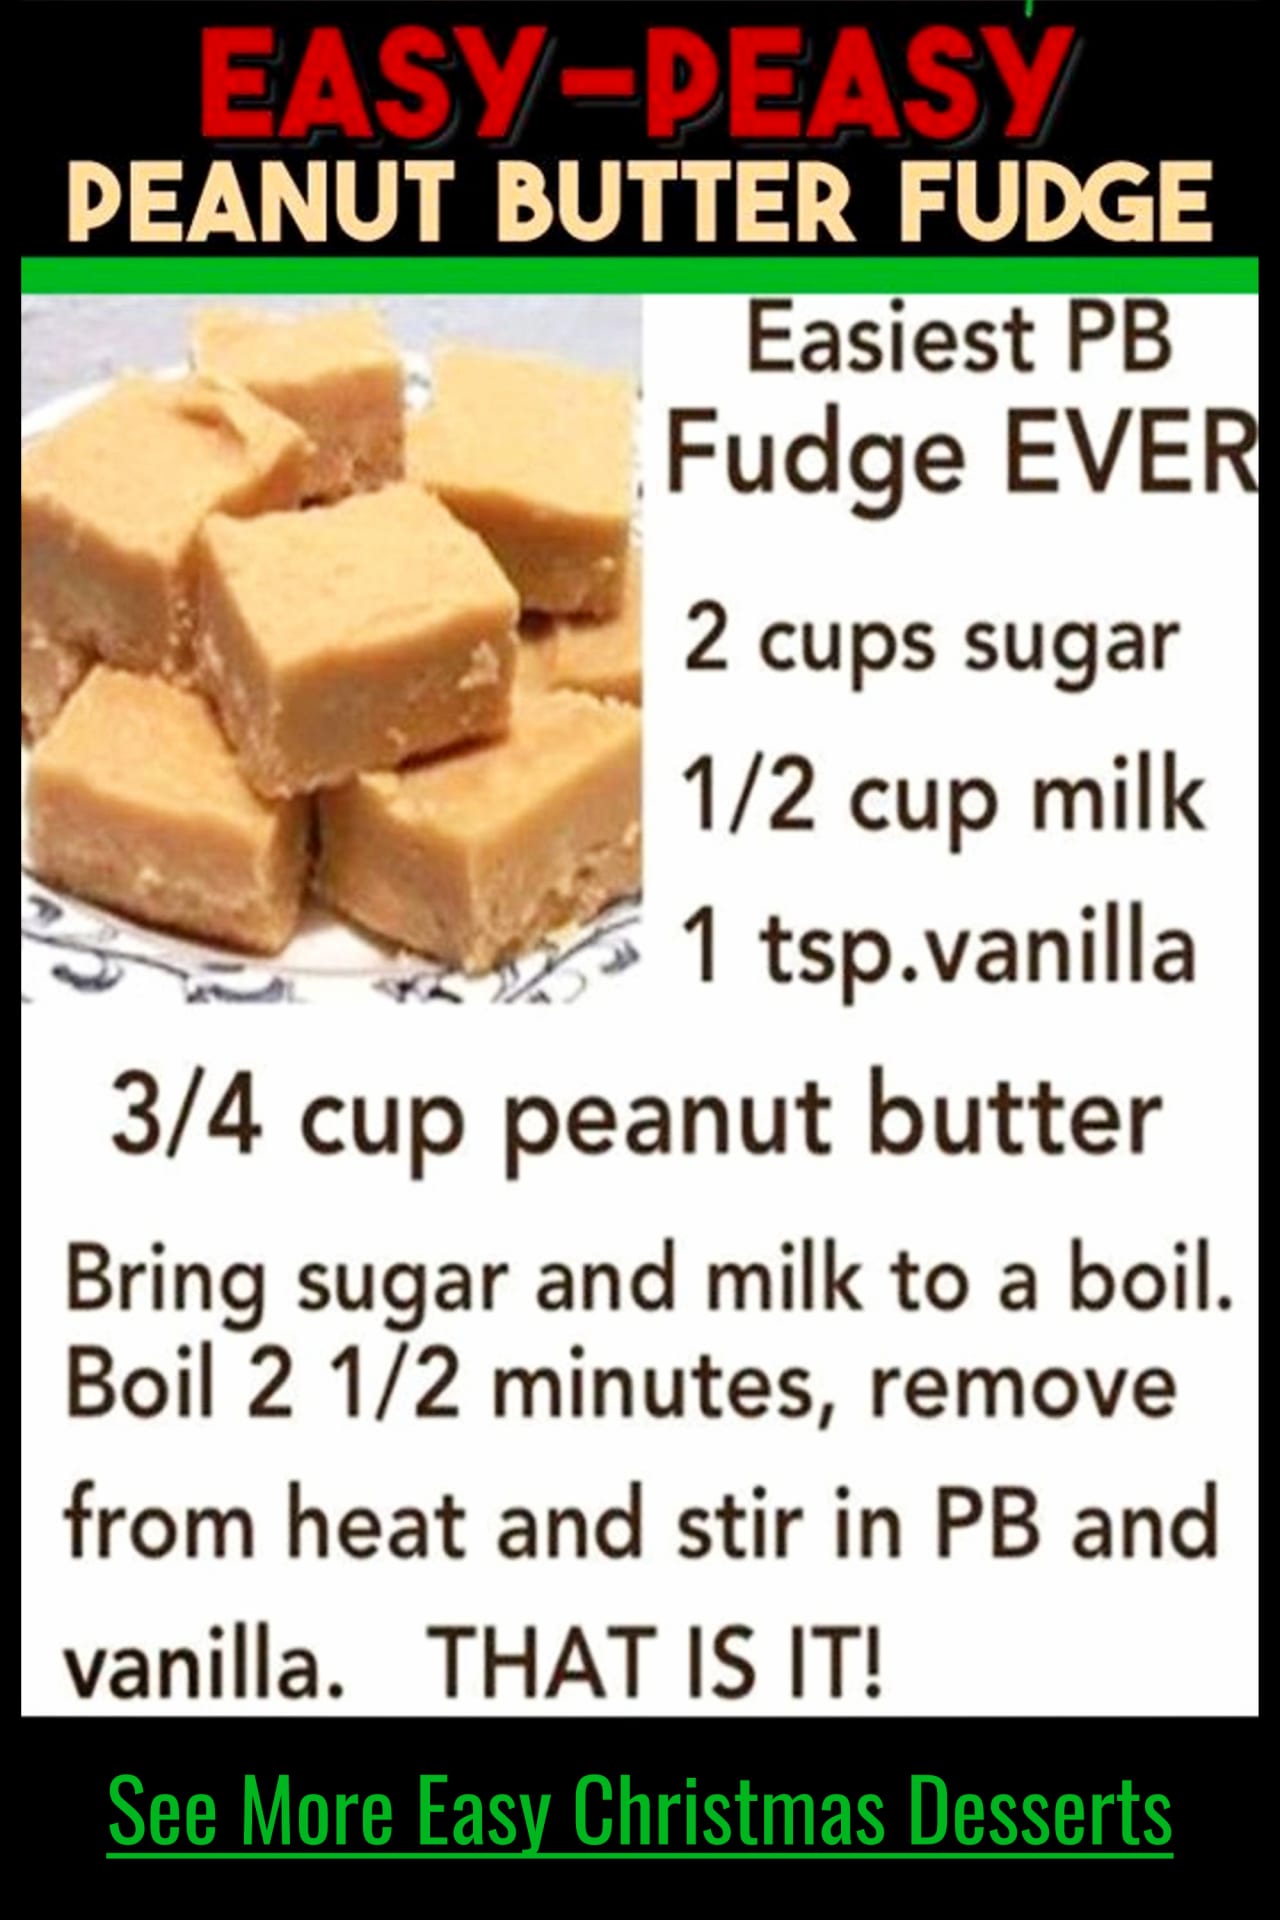 Easy Fudge Recipe WITHOUT Condensed Milk - Quick and Simple peanut butter fudge recipe - only 4 ingredients - no bake peanut butter fudge recipes and more easy 3 ingredient fudge recipes - super simple sweet treats and desserts for a crowd or holiday party.